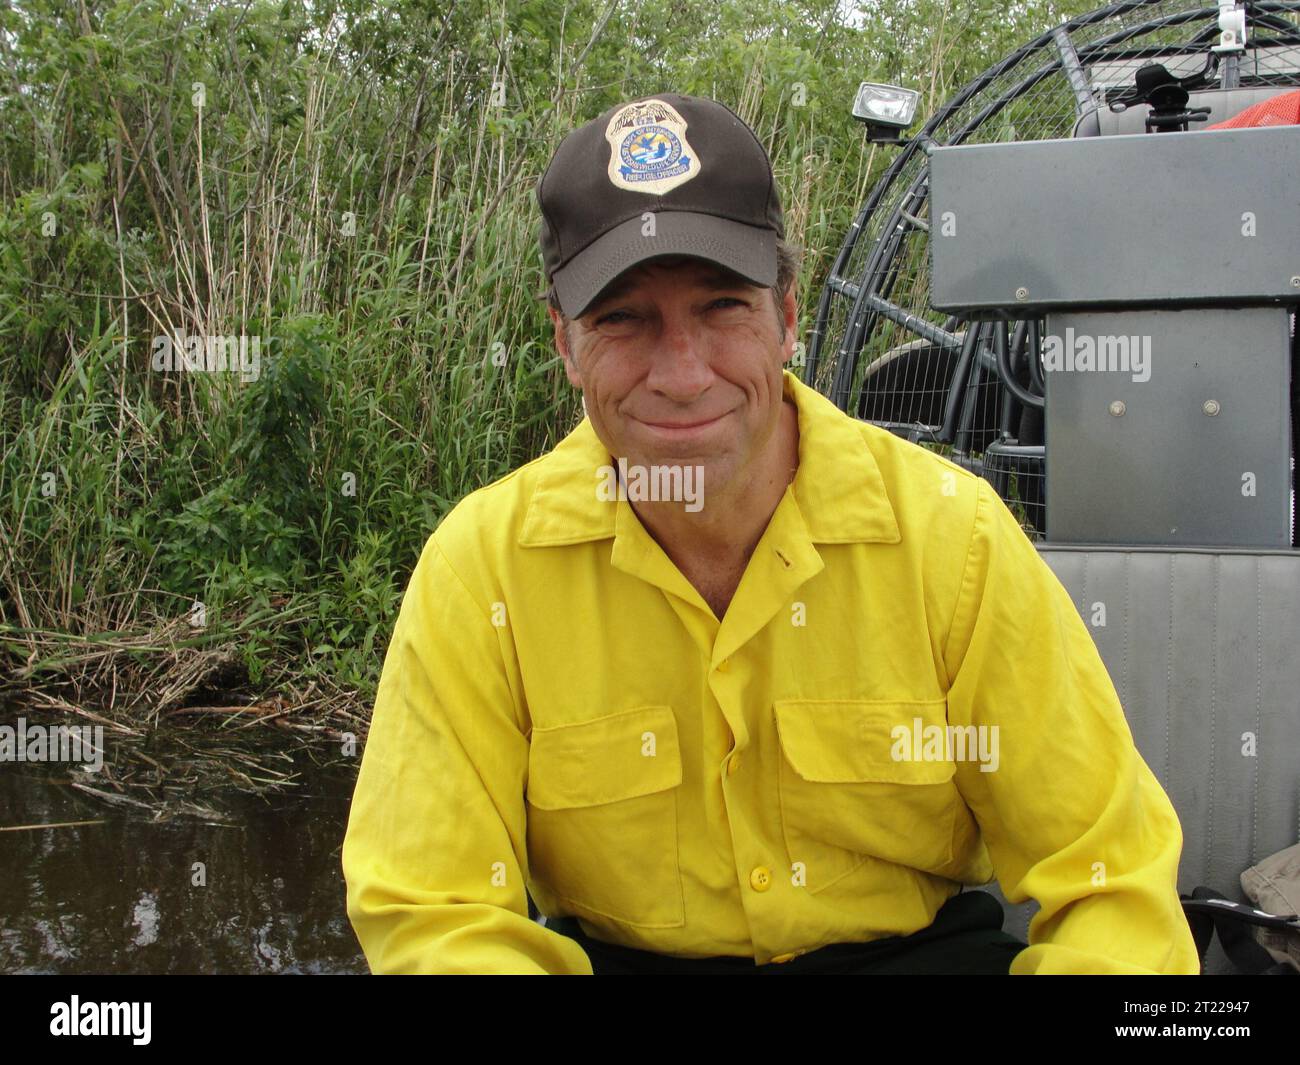 Mike Rowe, the popular host of the Discovery Channel series 'Dirty Jobs with Mike Rowe,' donned a U.S. Fish and Wildlife Service cap when he waded into Arthur R. Marshall National Wildlife Refuge in April 2010. Subjects: Connecting people with nature; Work of the Service. Location: Florida. Fish and Wildlife Service Site: ARTHUR R. MARSHALL LOXAHATCHEE NATIONAL WILDLIFE REFUGE. Stock Photo